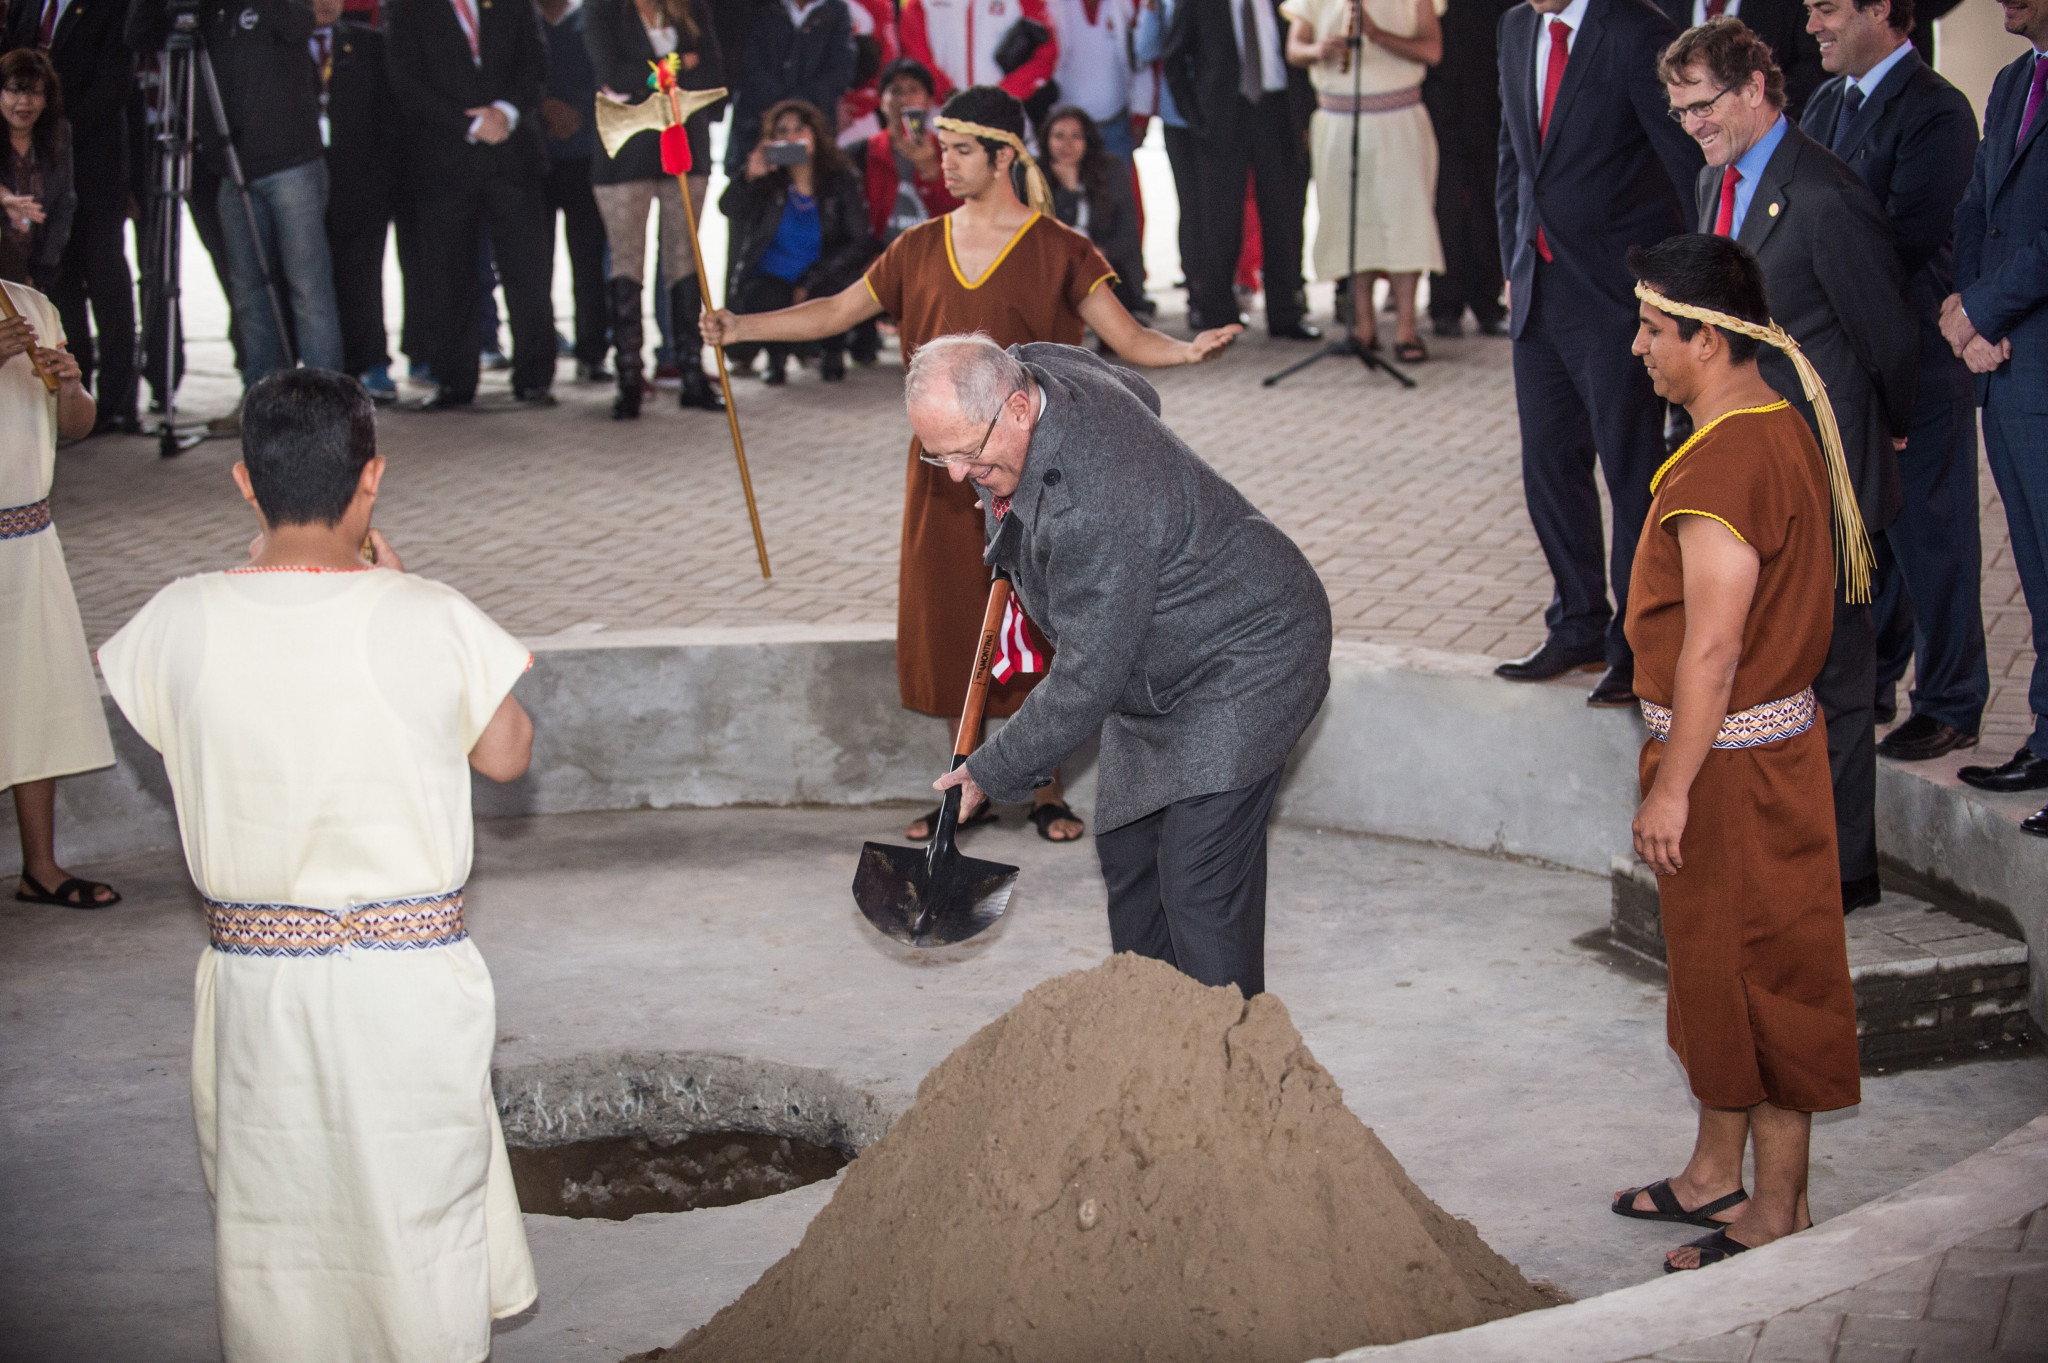 Pedro Pablo Kuczynski attending an inauguration event for Lima 2019 last year ©Getty Images